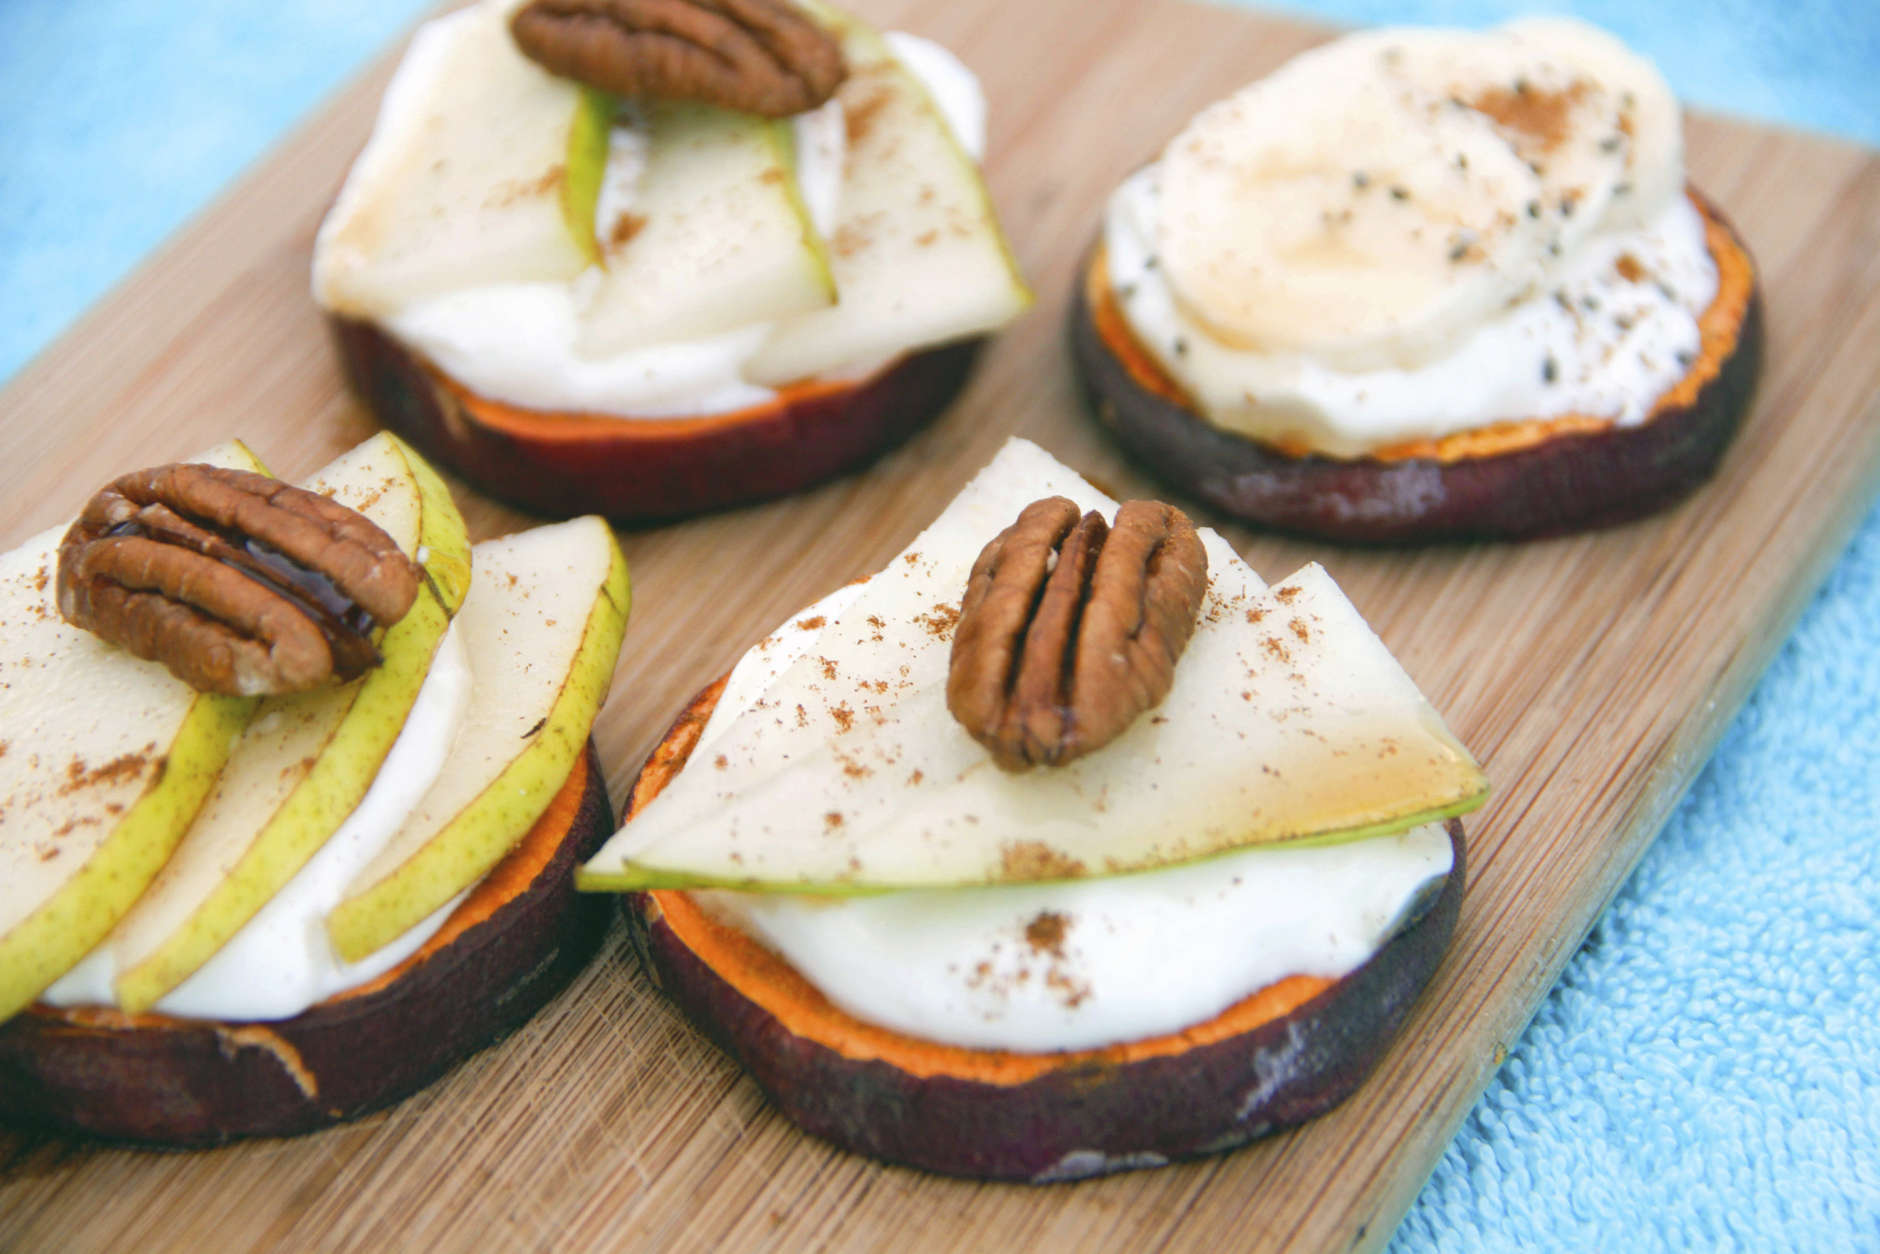 This Nov. 22, 2016 photo shows a recipe for sweet potato toasts made with slices of sweet potato, covered with pear and yogurt and topped with a pecan in Coronado, Calif. ( Melissa d'Arabian via AP)